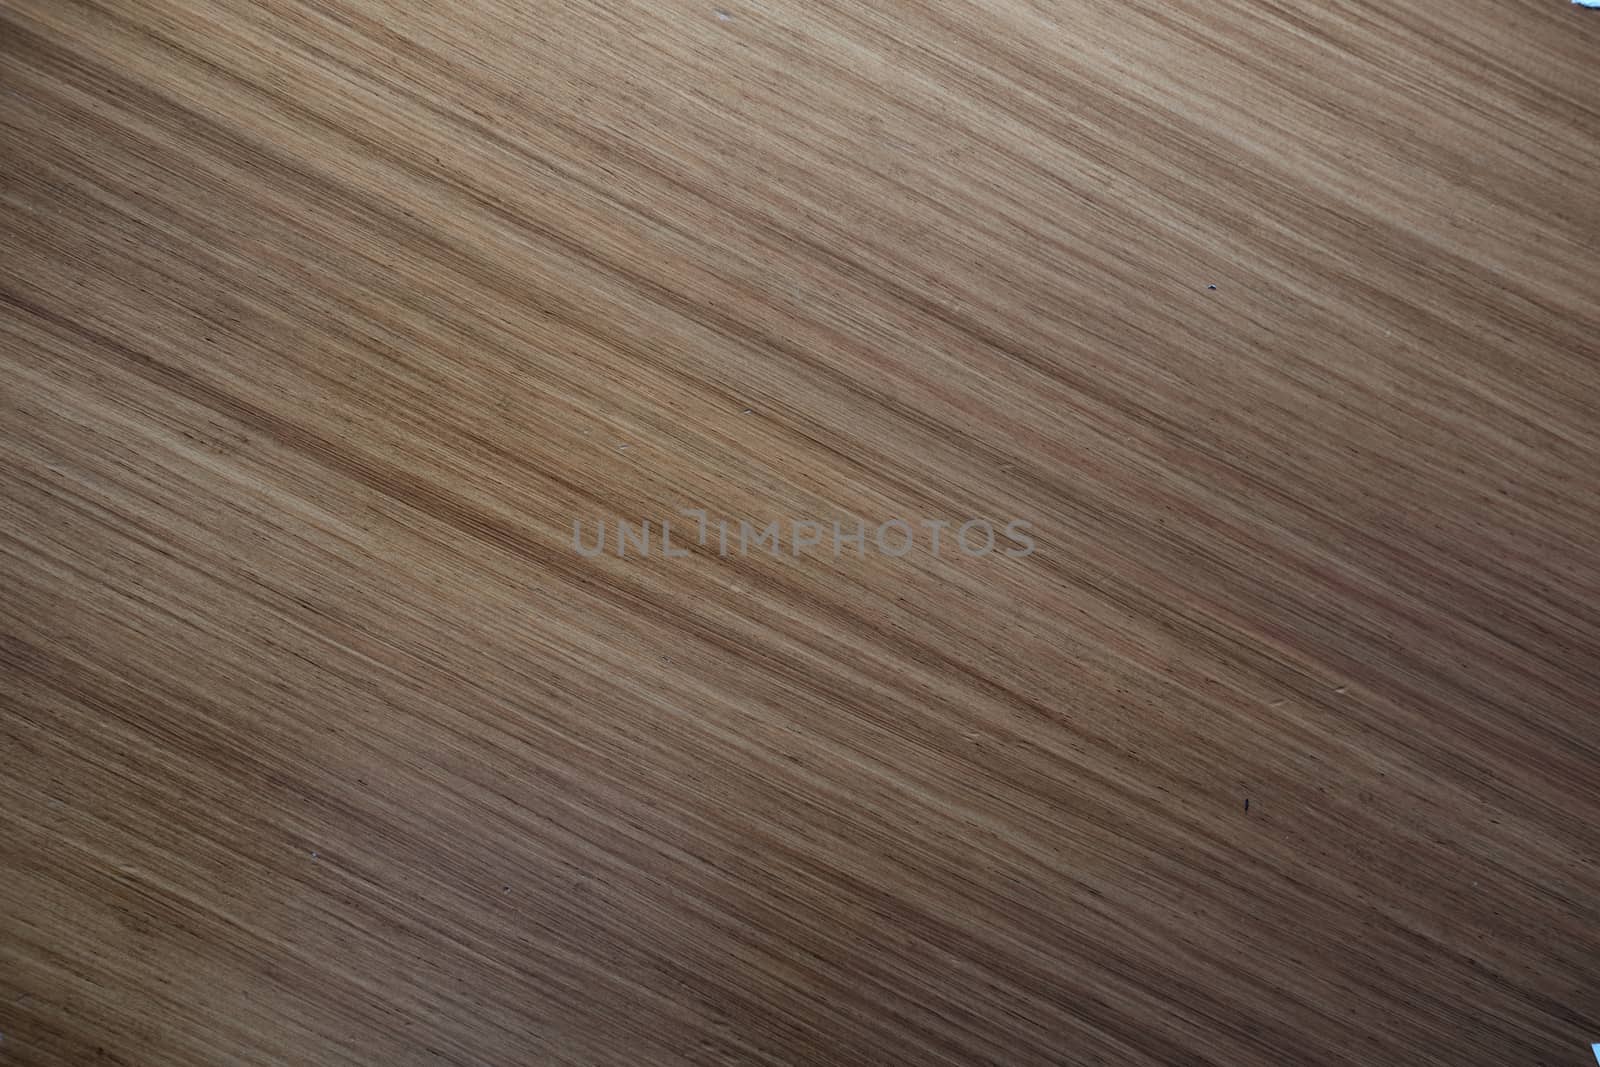 Light and dark streaks cross this wooden table making a beautiful natural background